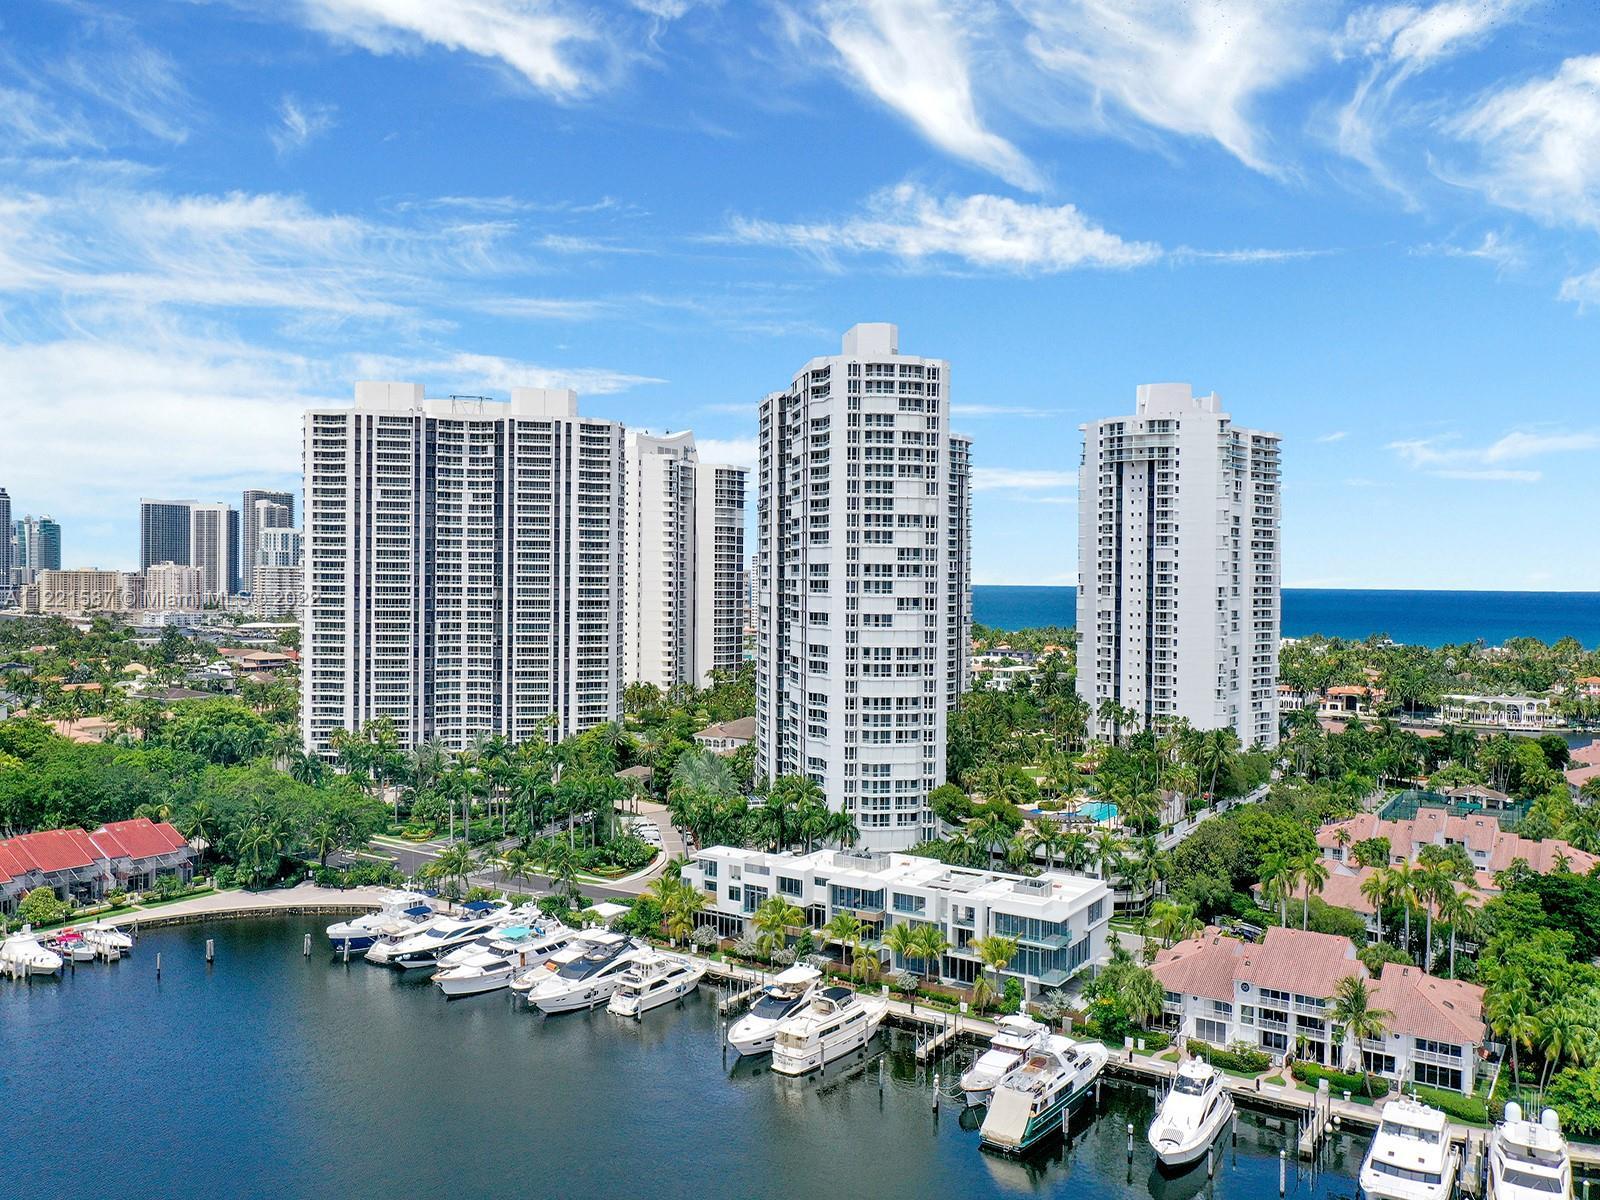 This unit has sprawling balconies with city/marina views and partial ocean views! The complex offers